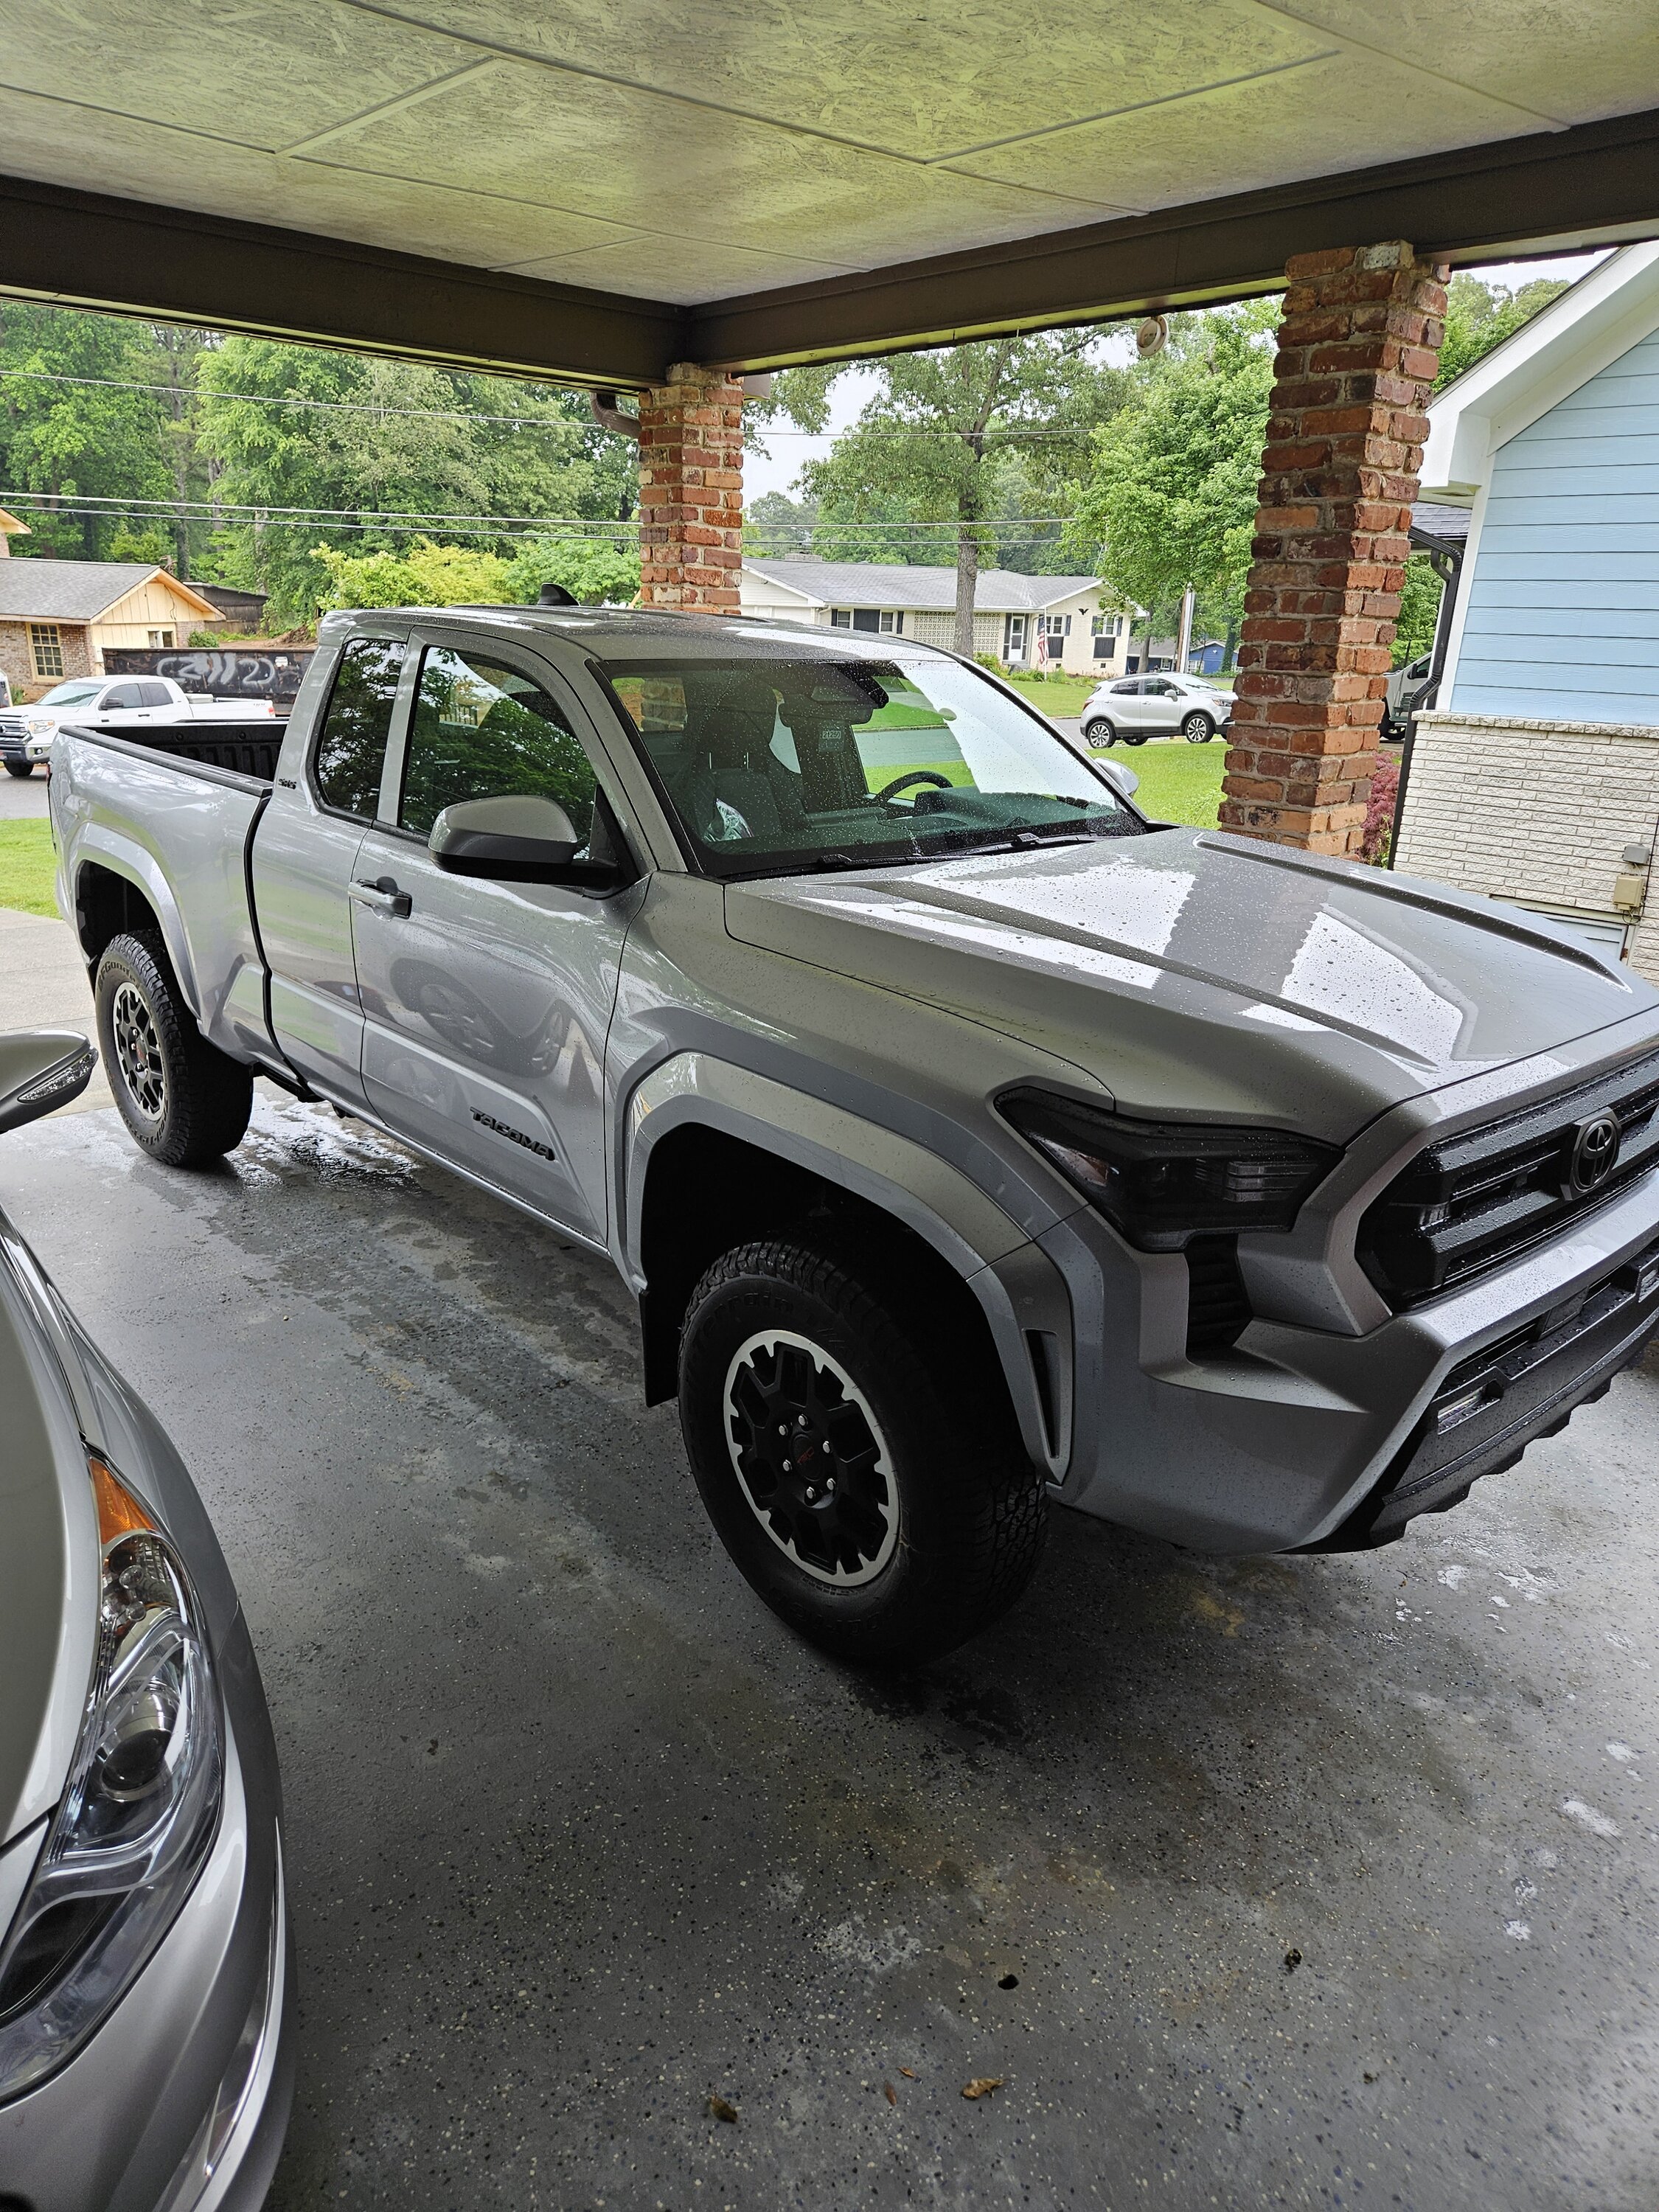 2024 Tacoma Xtracab 2024 Tacoma SR5 in Celestial Silver Metallic w/ better photos, different wheels, and a basic review 1000007622